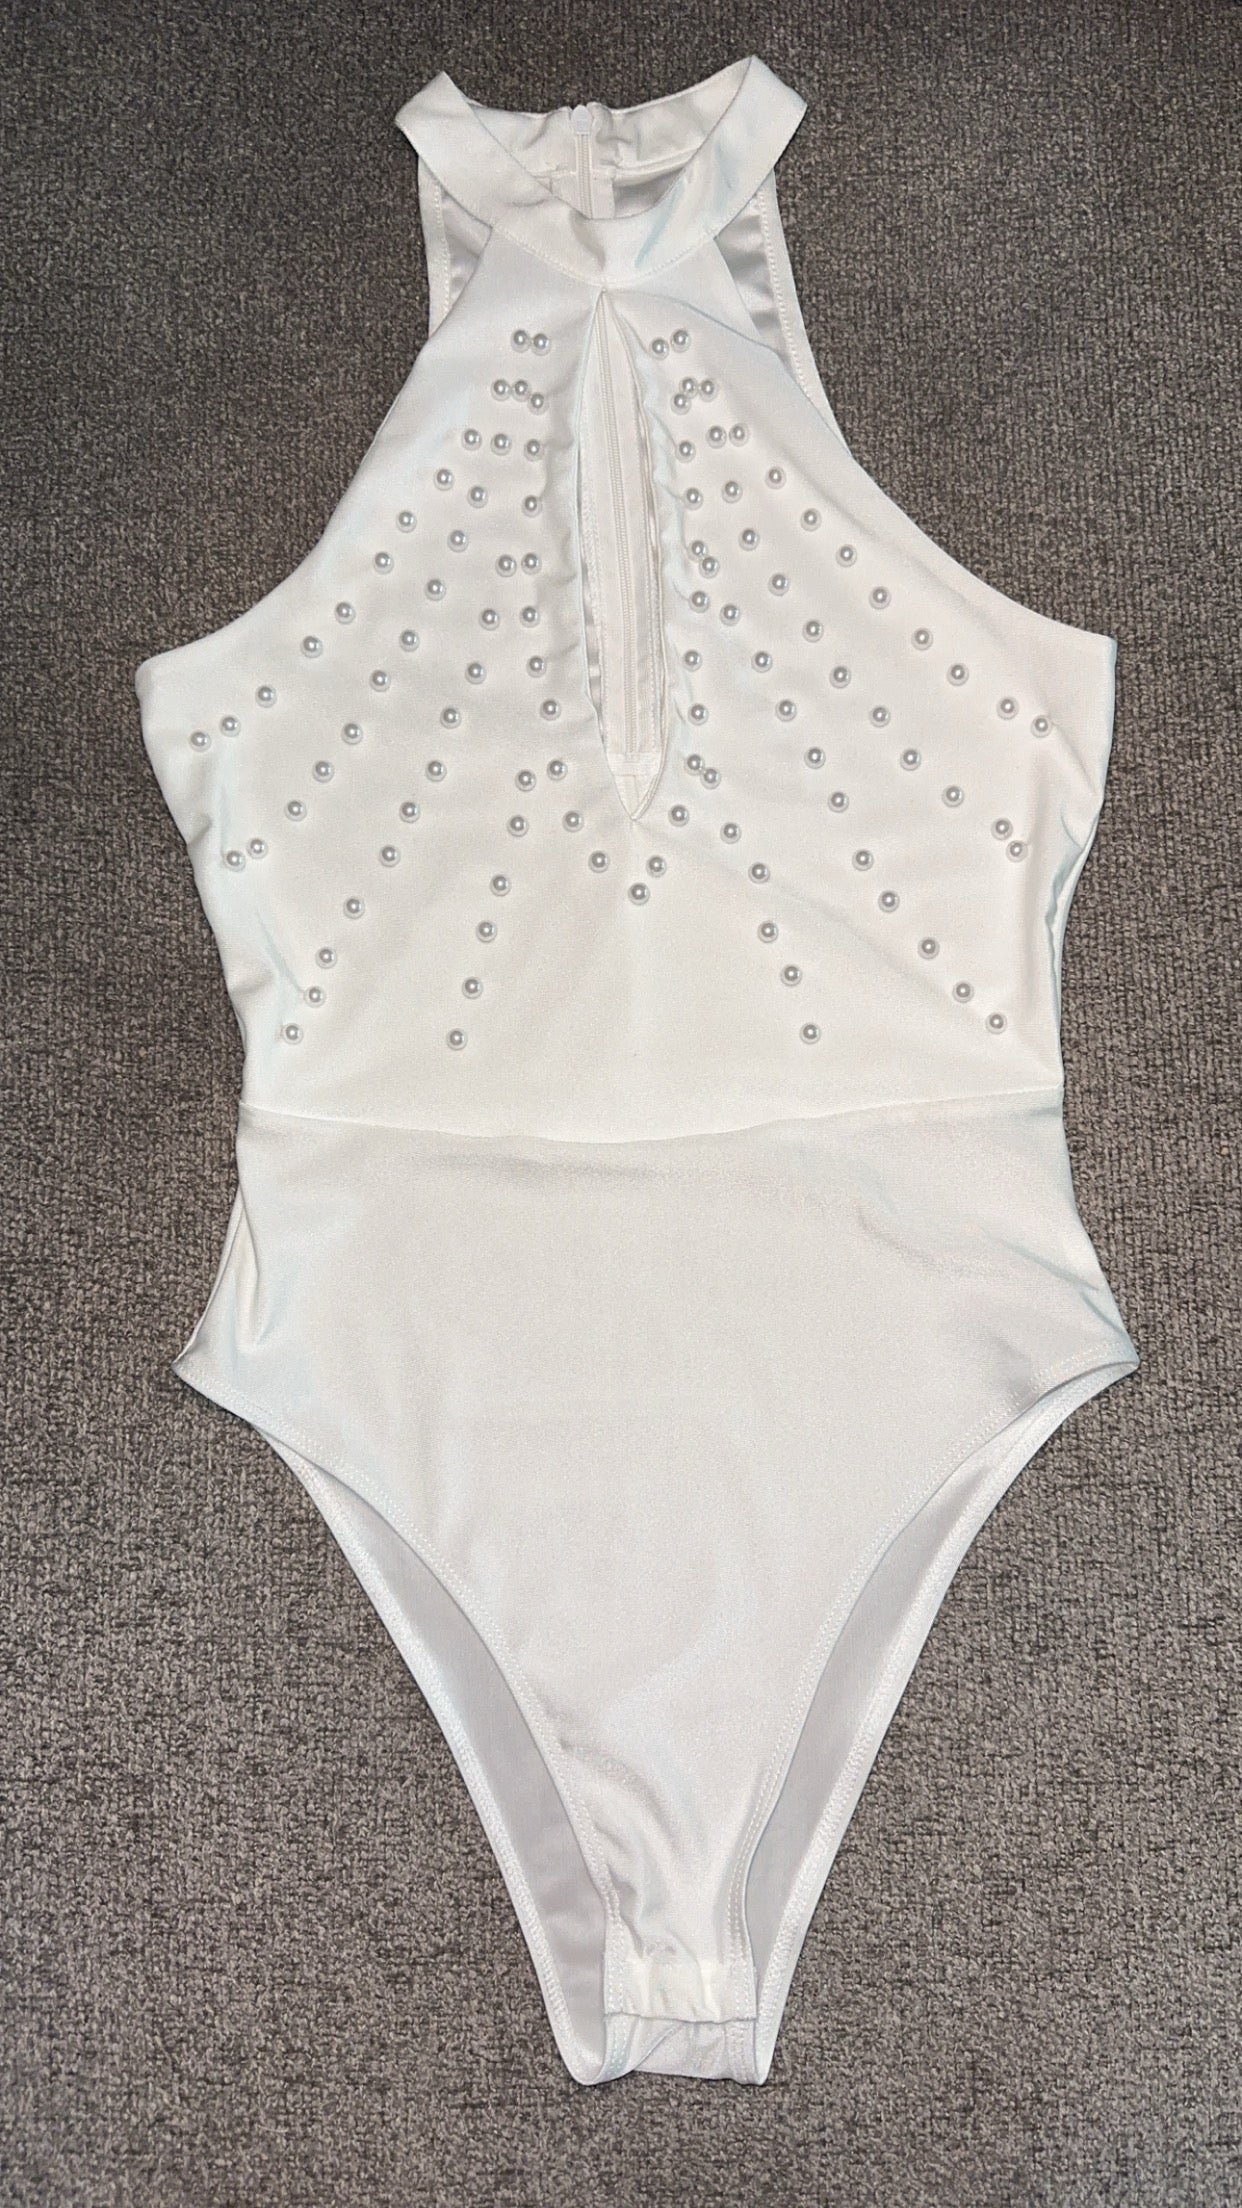 CHIC AND CLASSY PEARL BODY SUIT